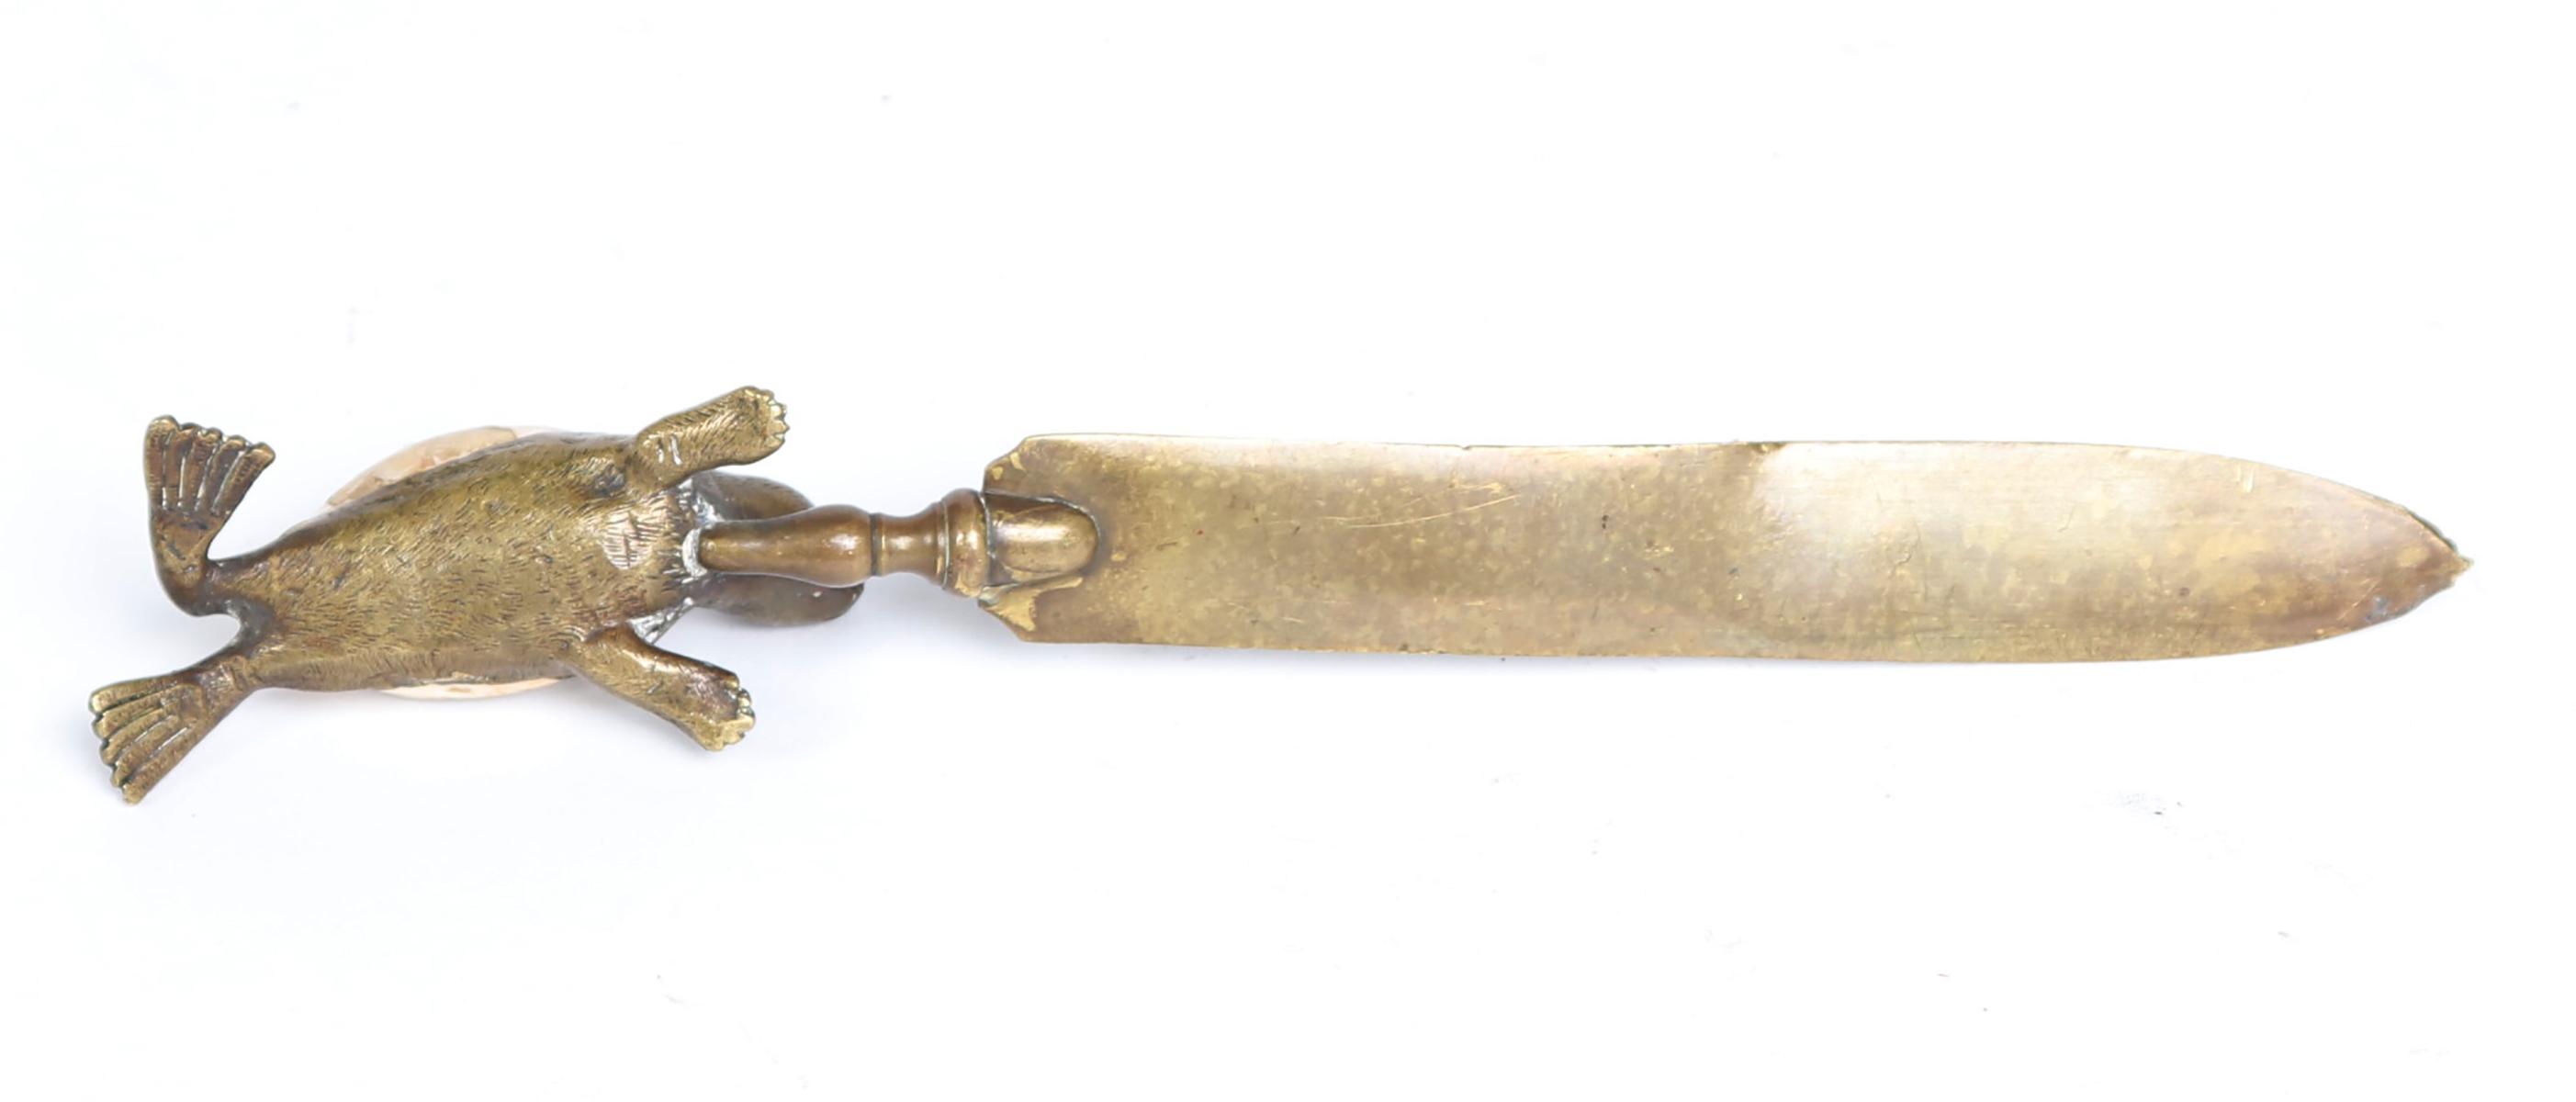 Pair of Letter Openers